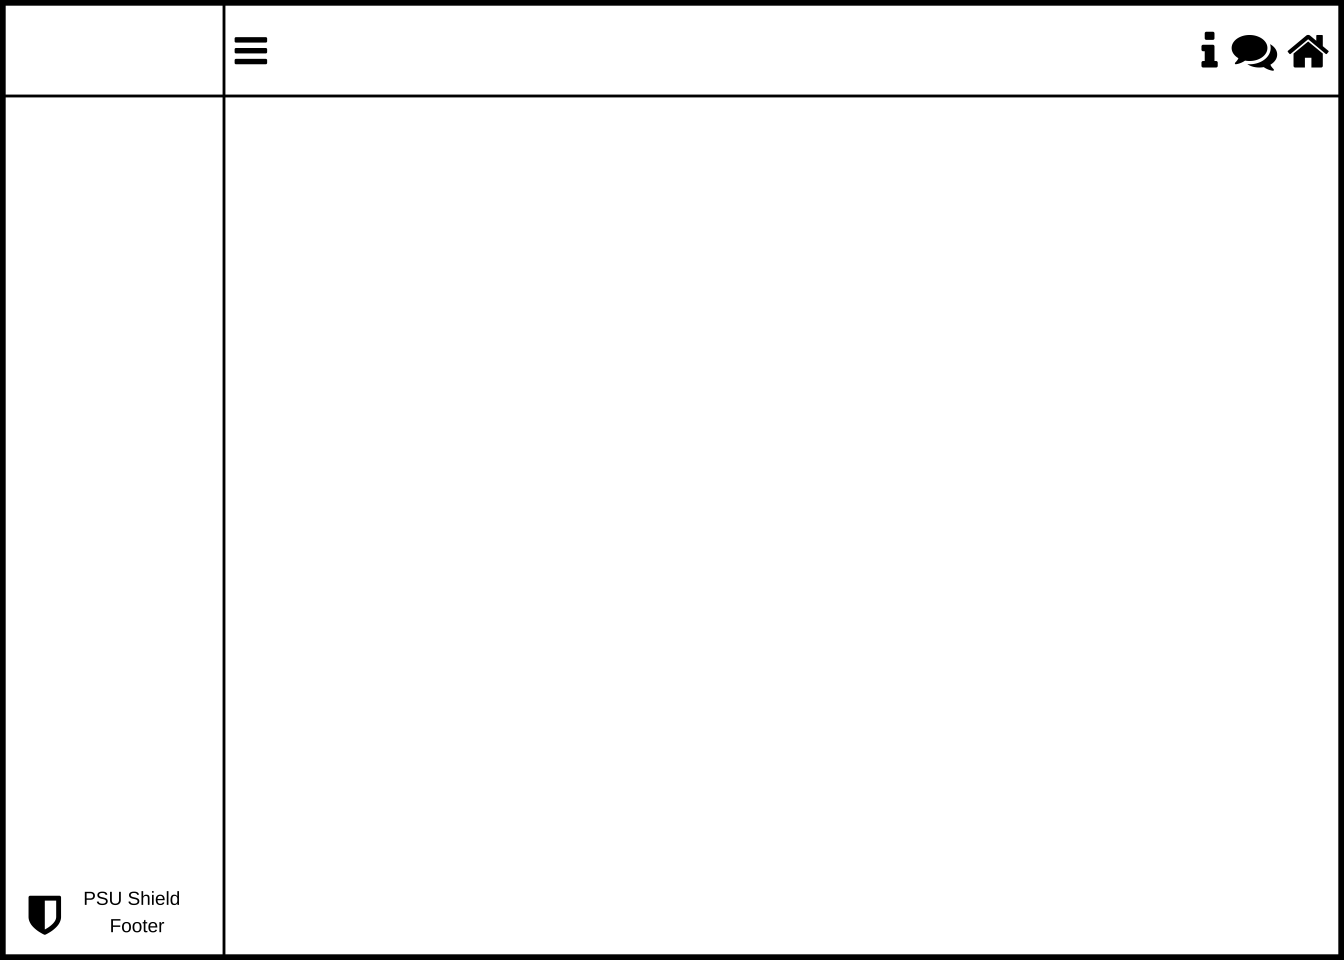 Blank layout for sketching your ideas